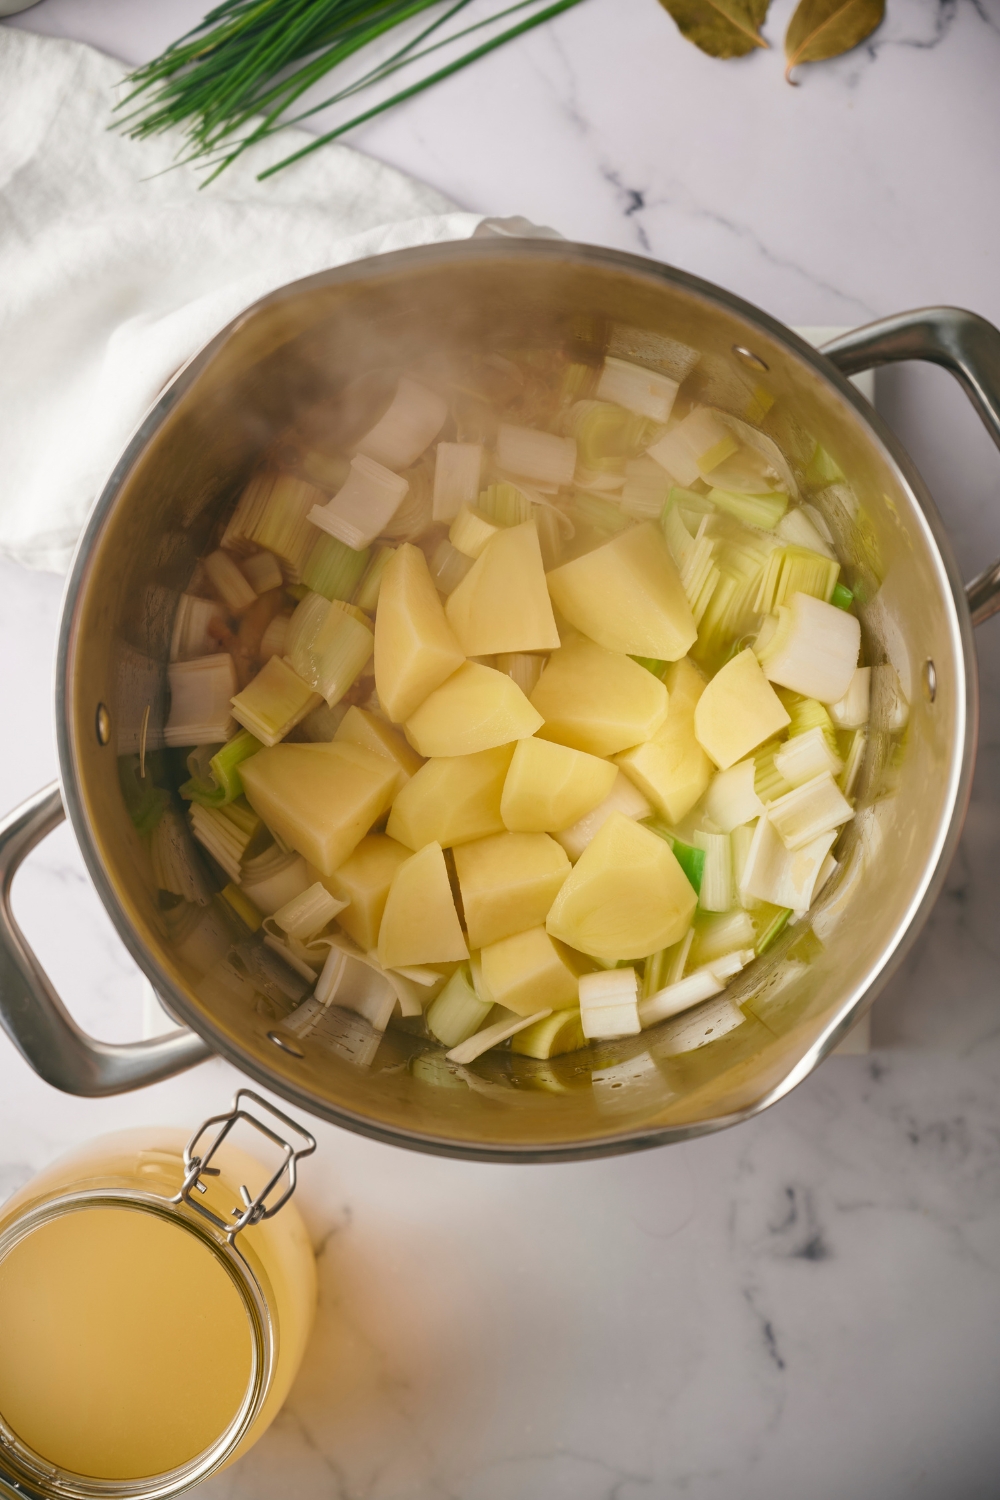 Diced potatoes on top of chopped leeks cooking a pot.